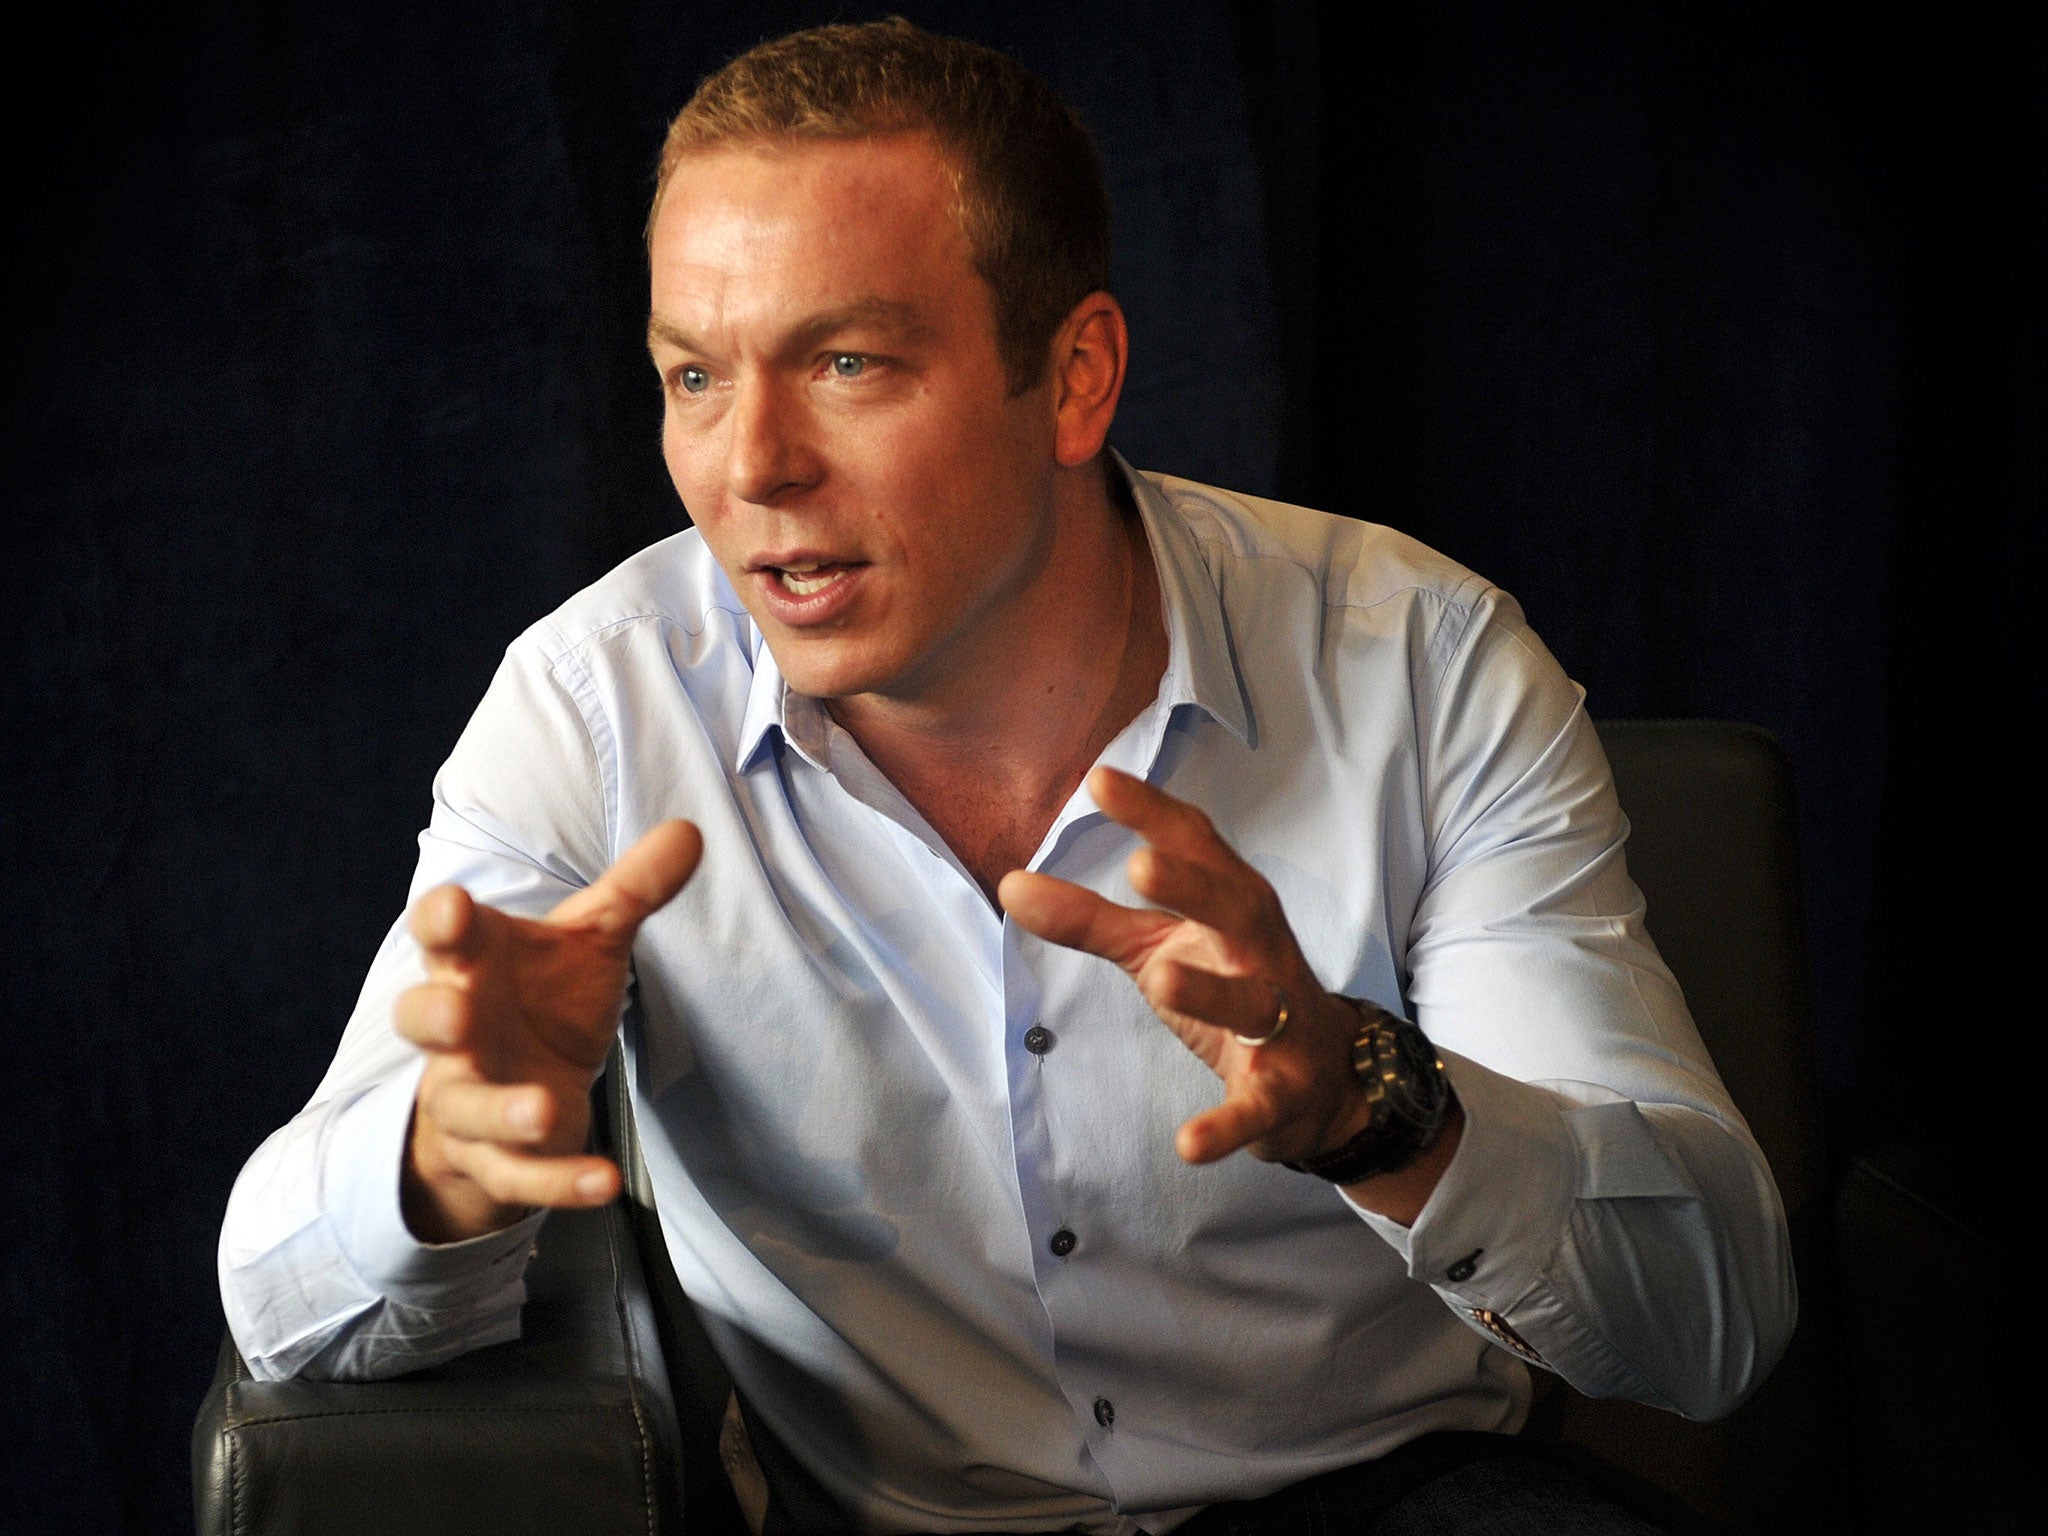 Sir Chris Hoy said he didn’t want to start making up the numbers